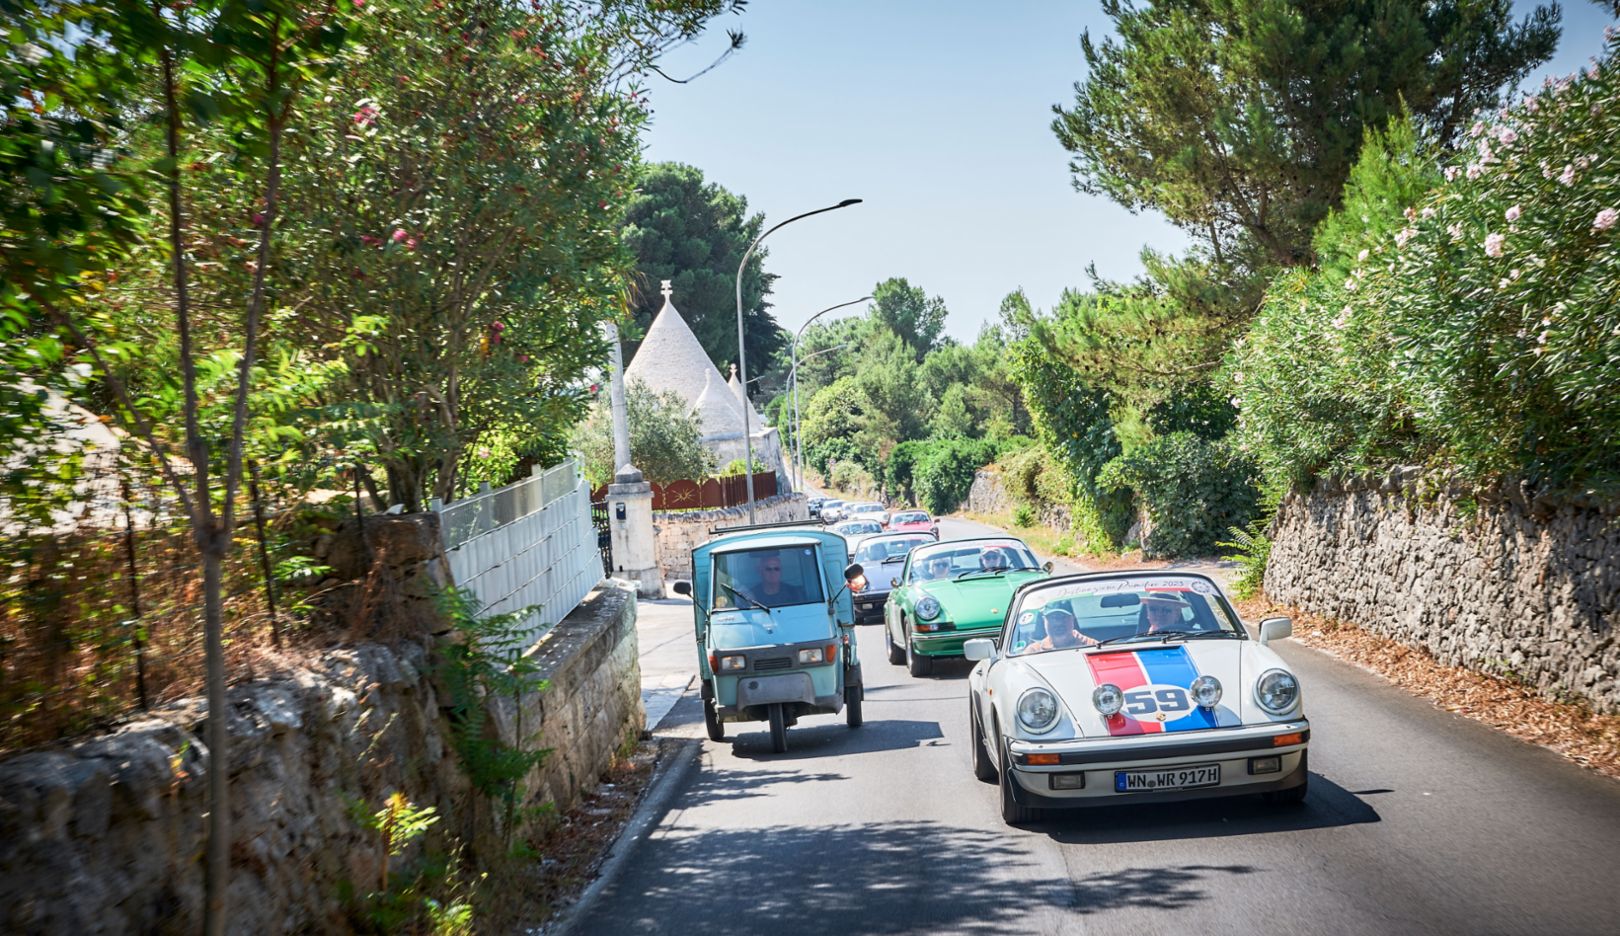 Classics among themselves: On the drive to Martina Franca through the Itria Valley plain, the Porsche convoy overtakes a three-wheeled Piaggio Ape.